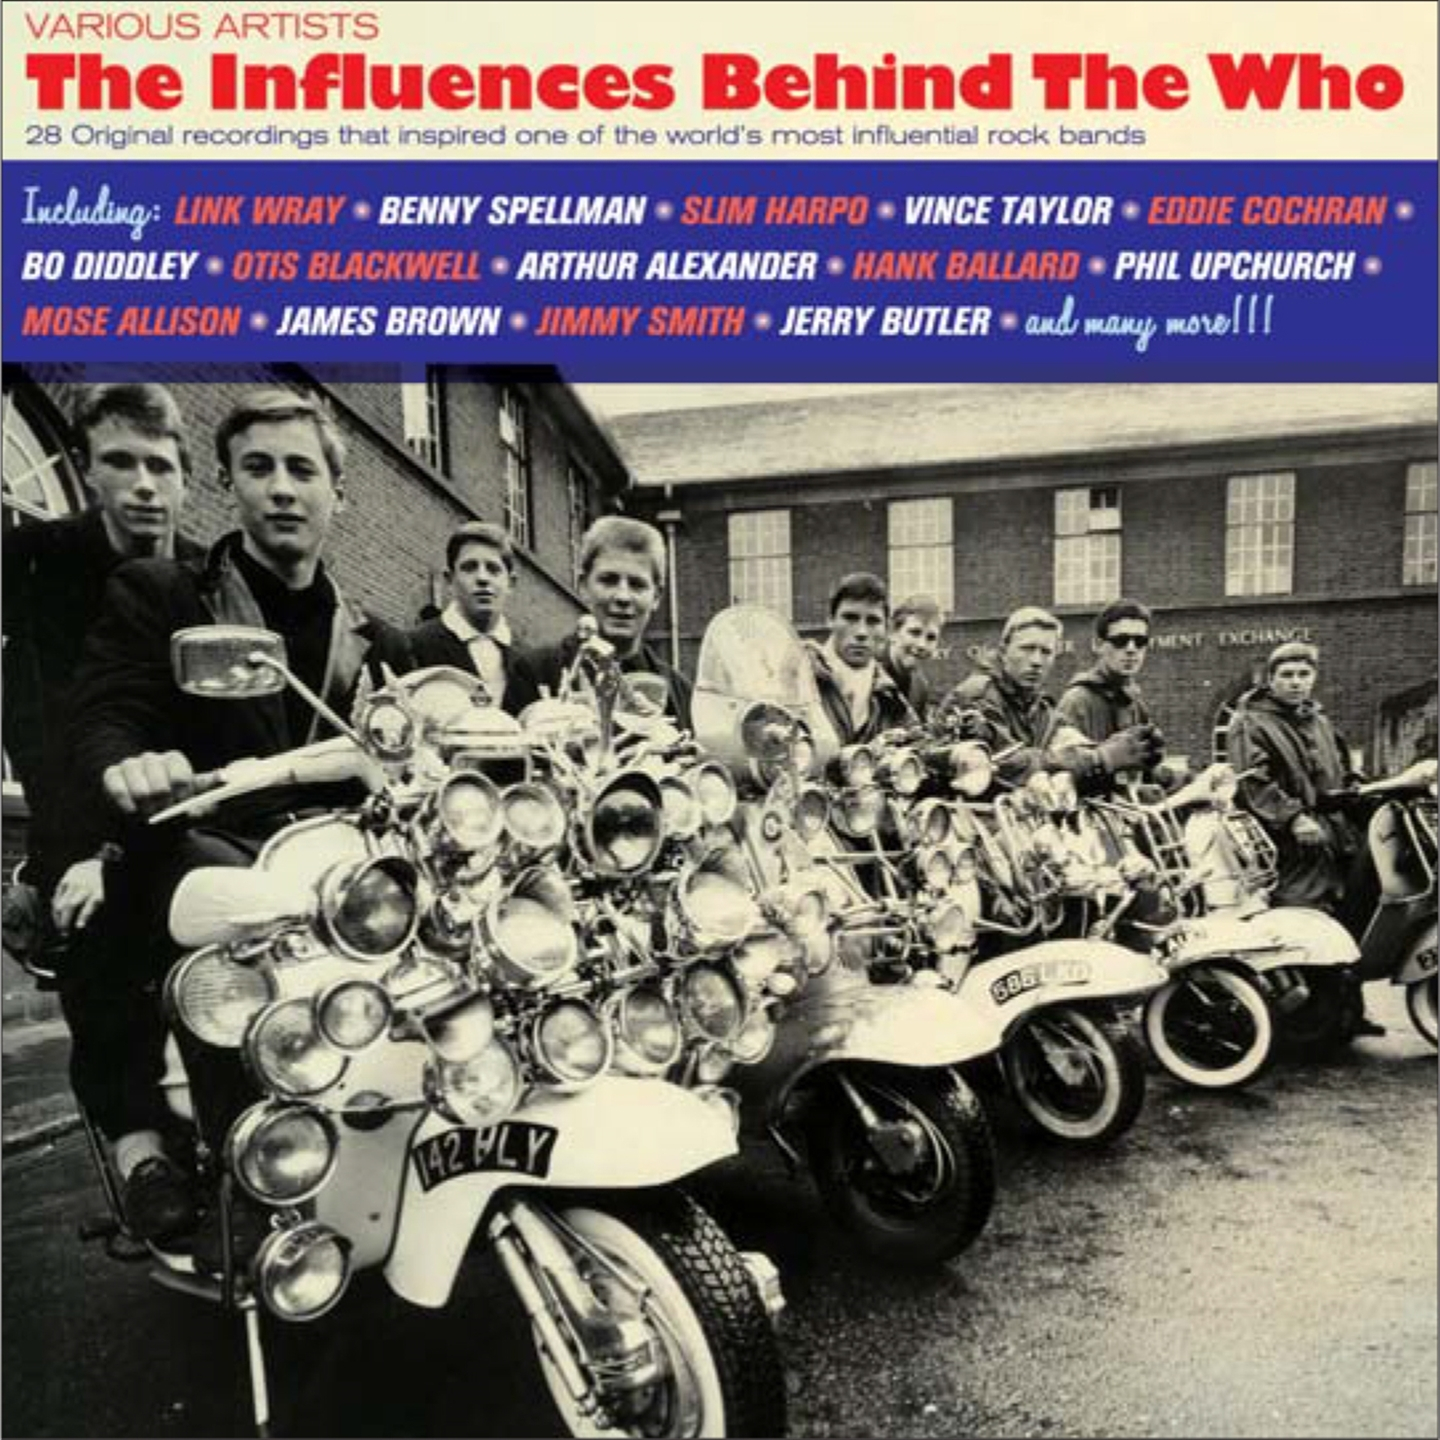 INFLUENCES BEHIND THE WHO